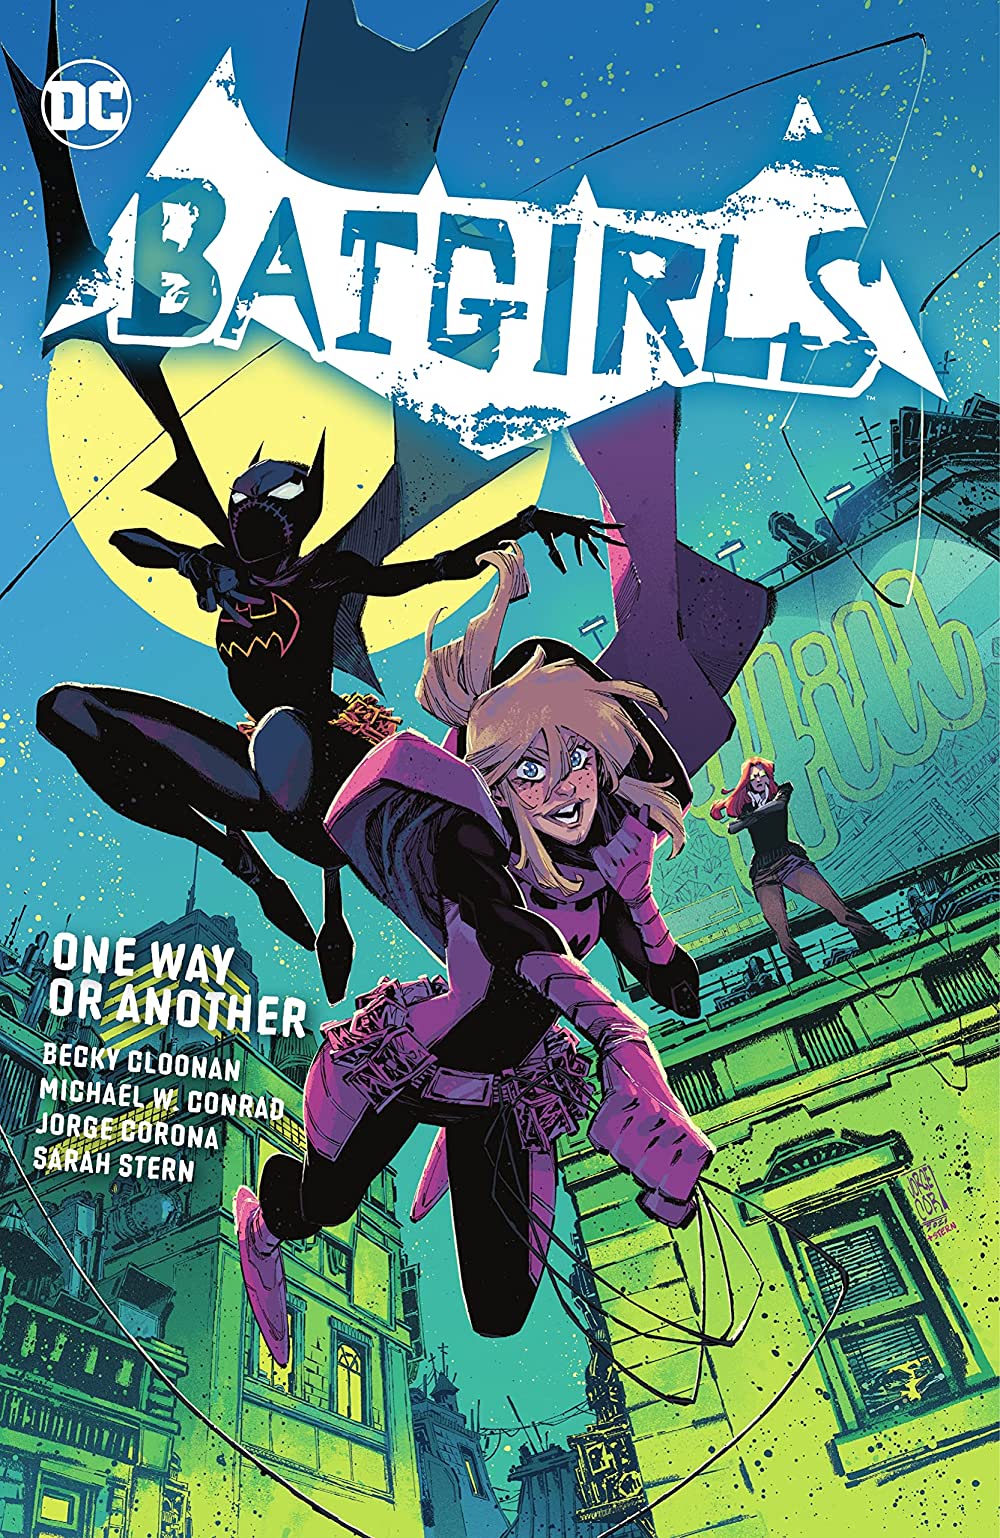 Batgirls: One Way or Another book cover